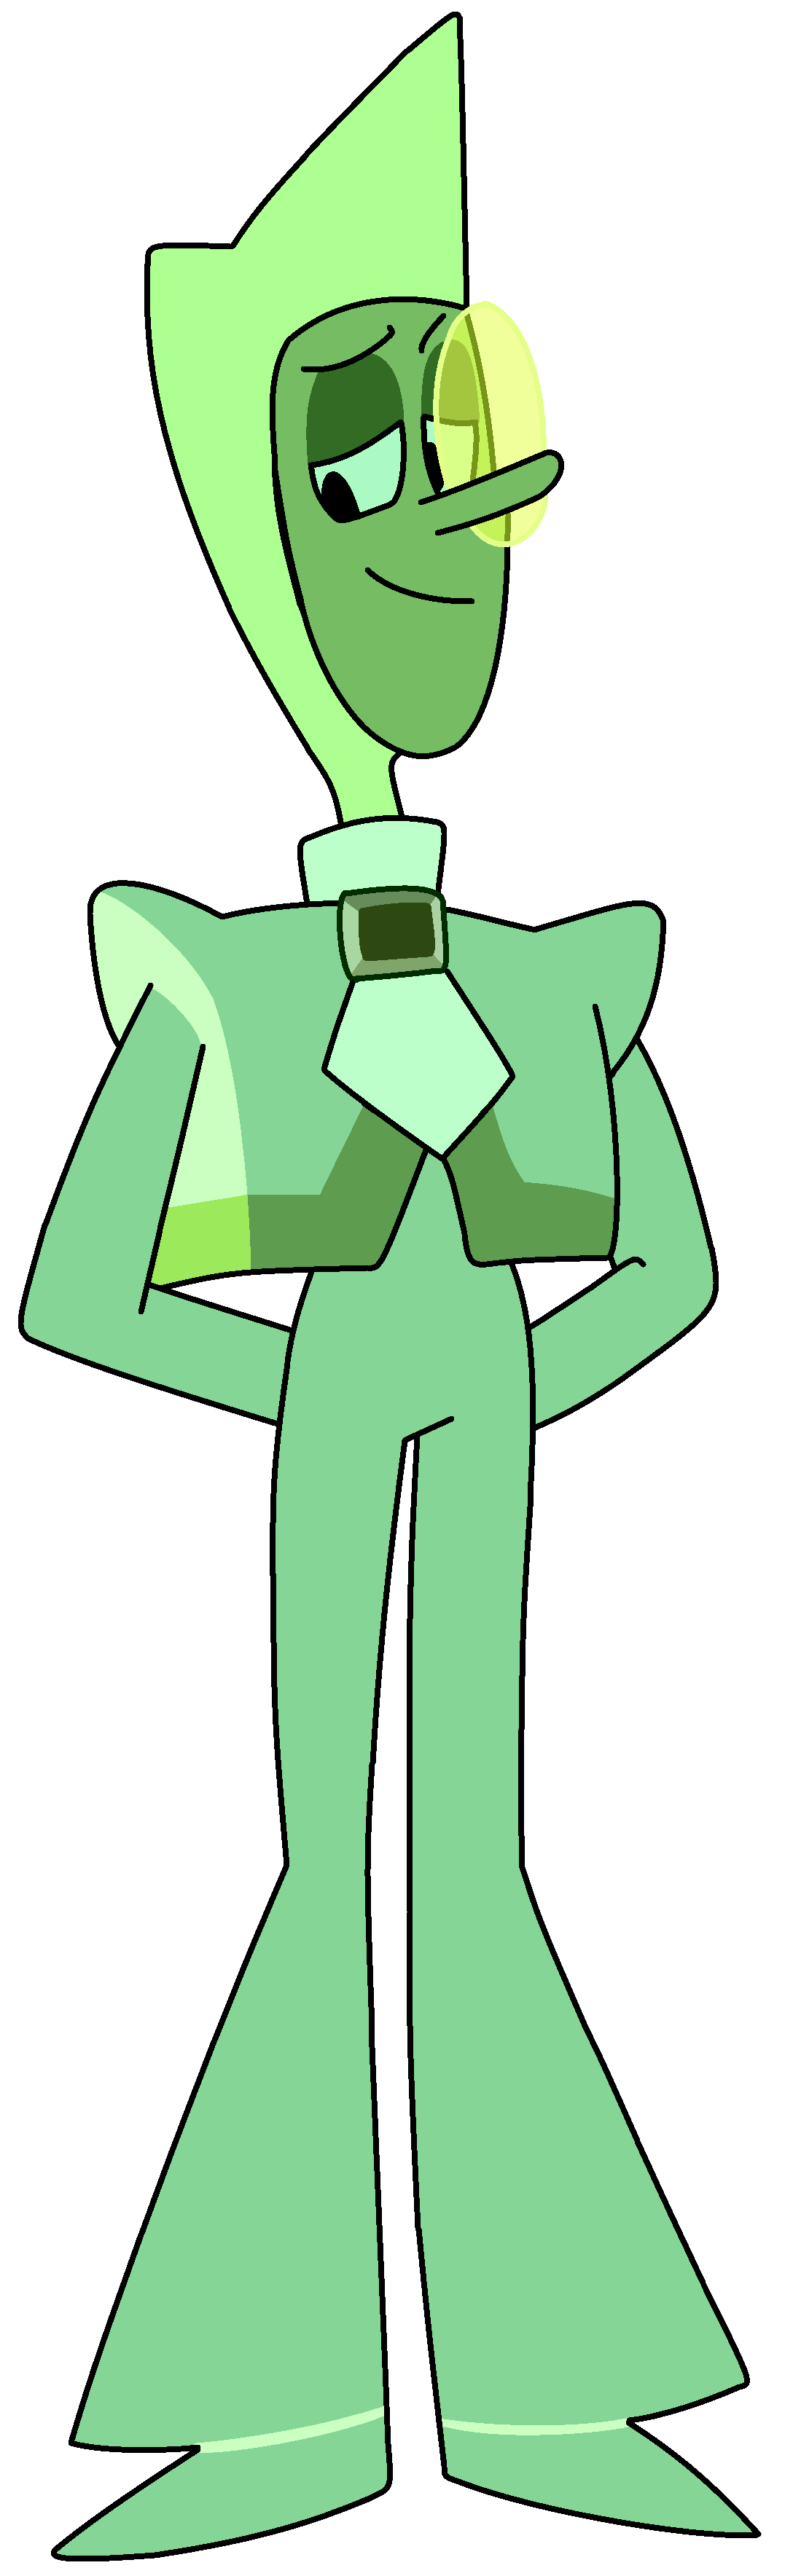 Image result for zircon from steven universe